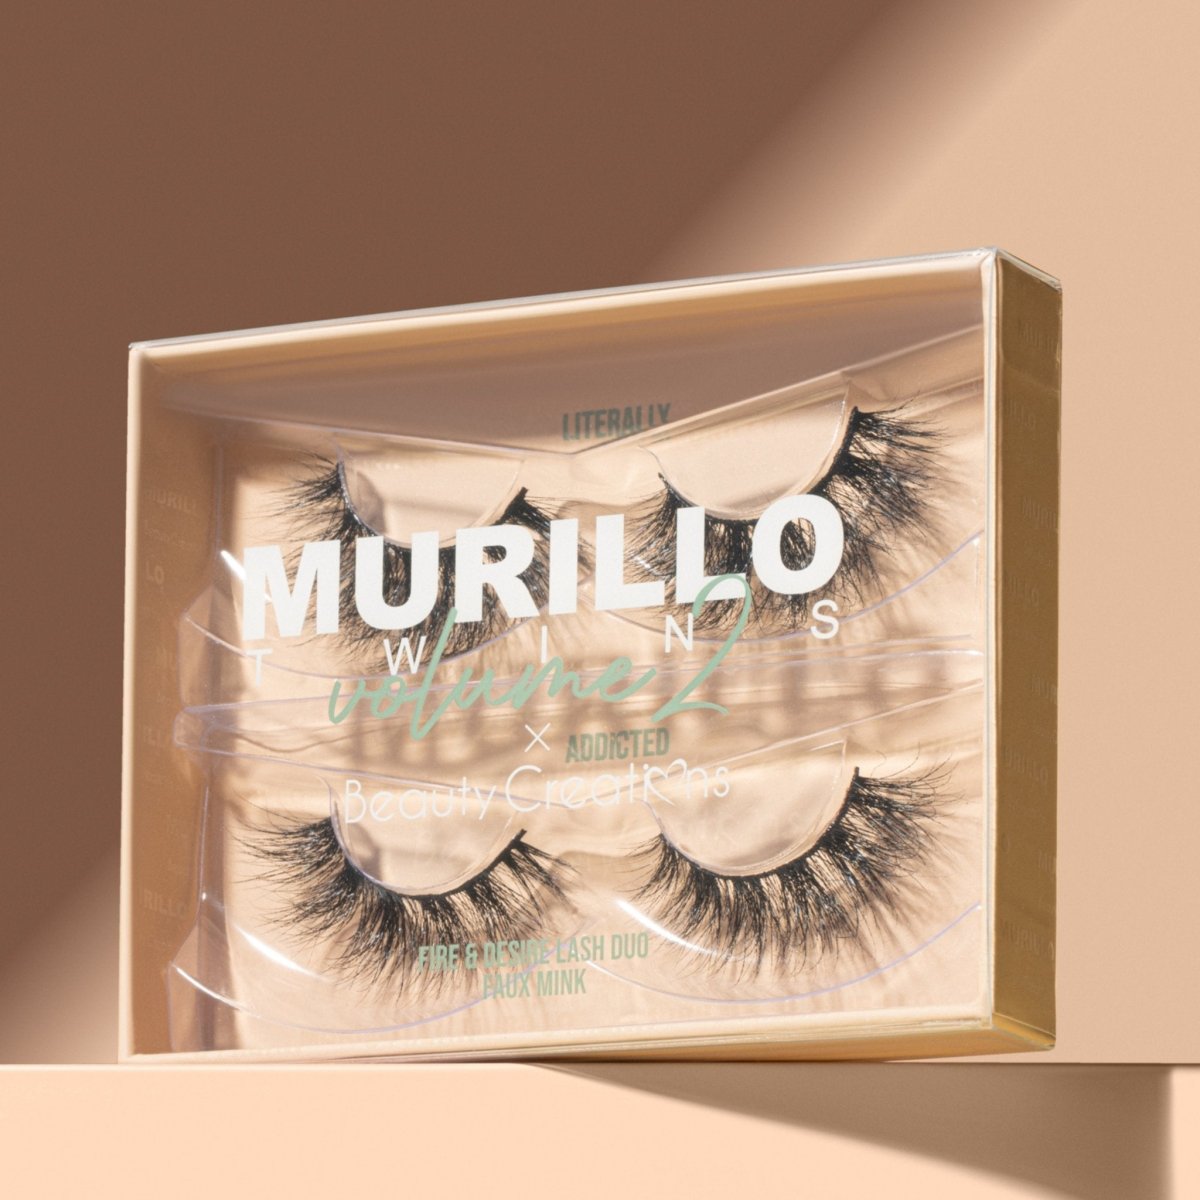 Beauty Creations Cosmetics Mx - Beauty Creations - Murillo Twins Vol. 2 - FIRE & DESIRE Lashes - MT2 - ELS